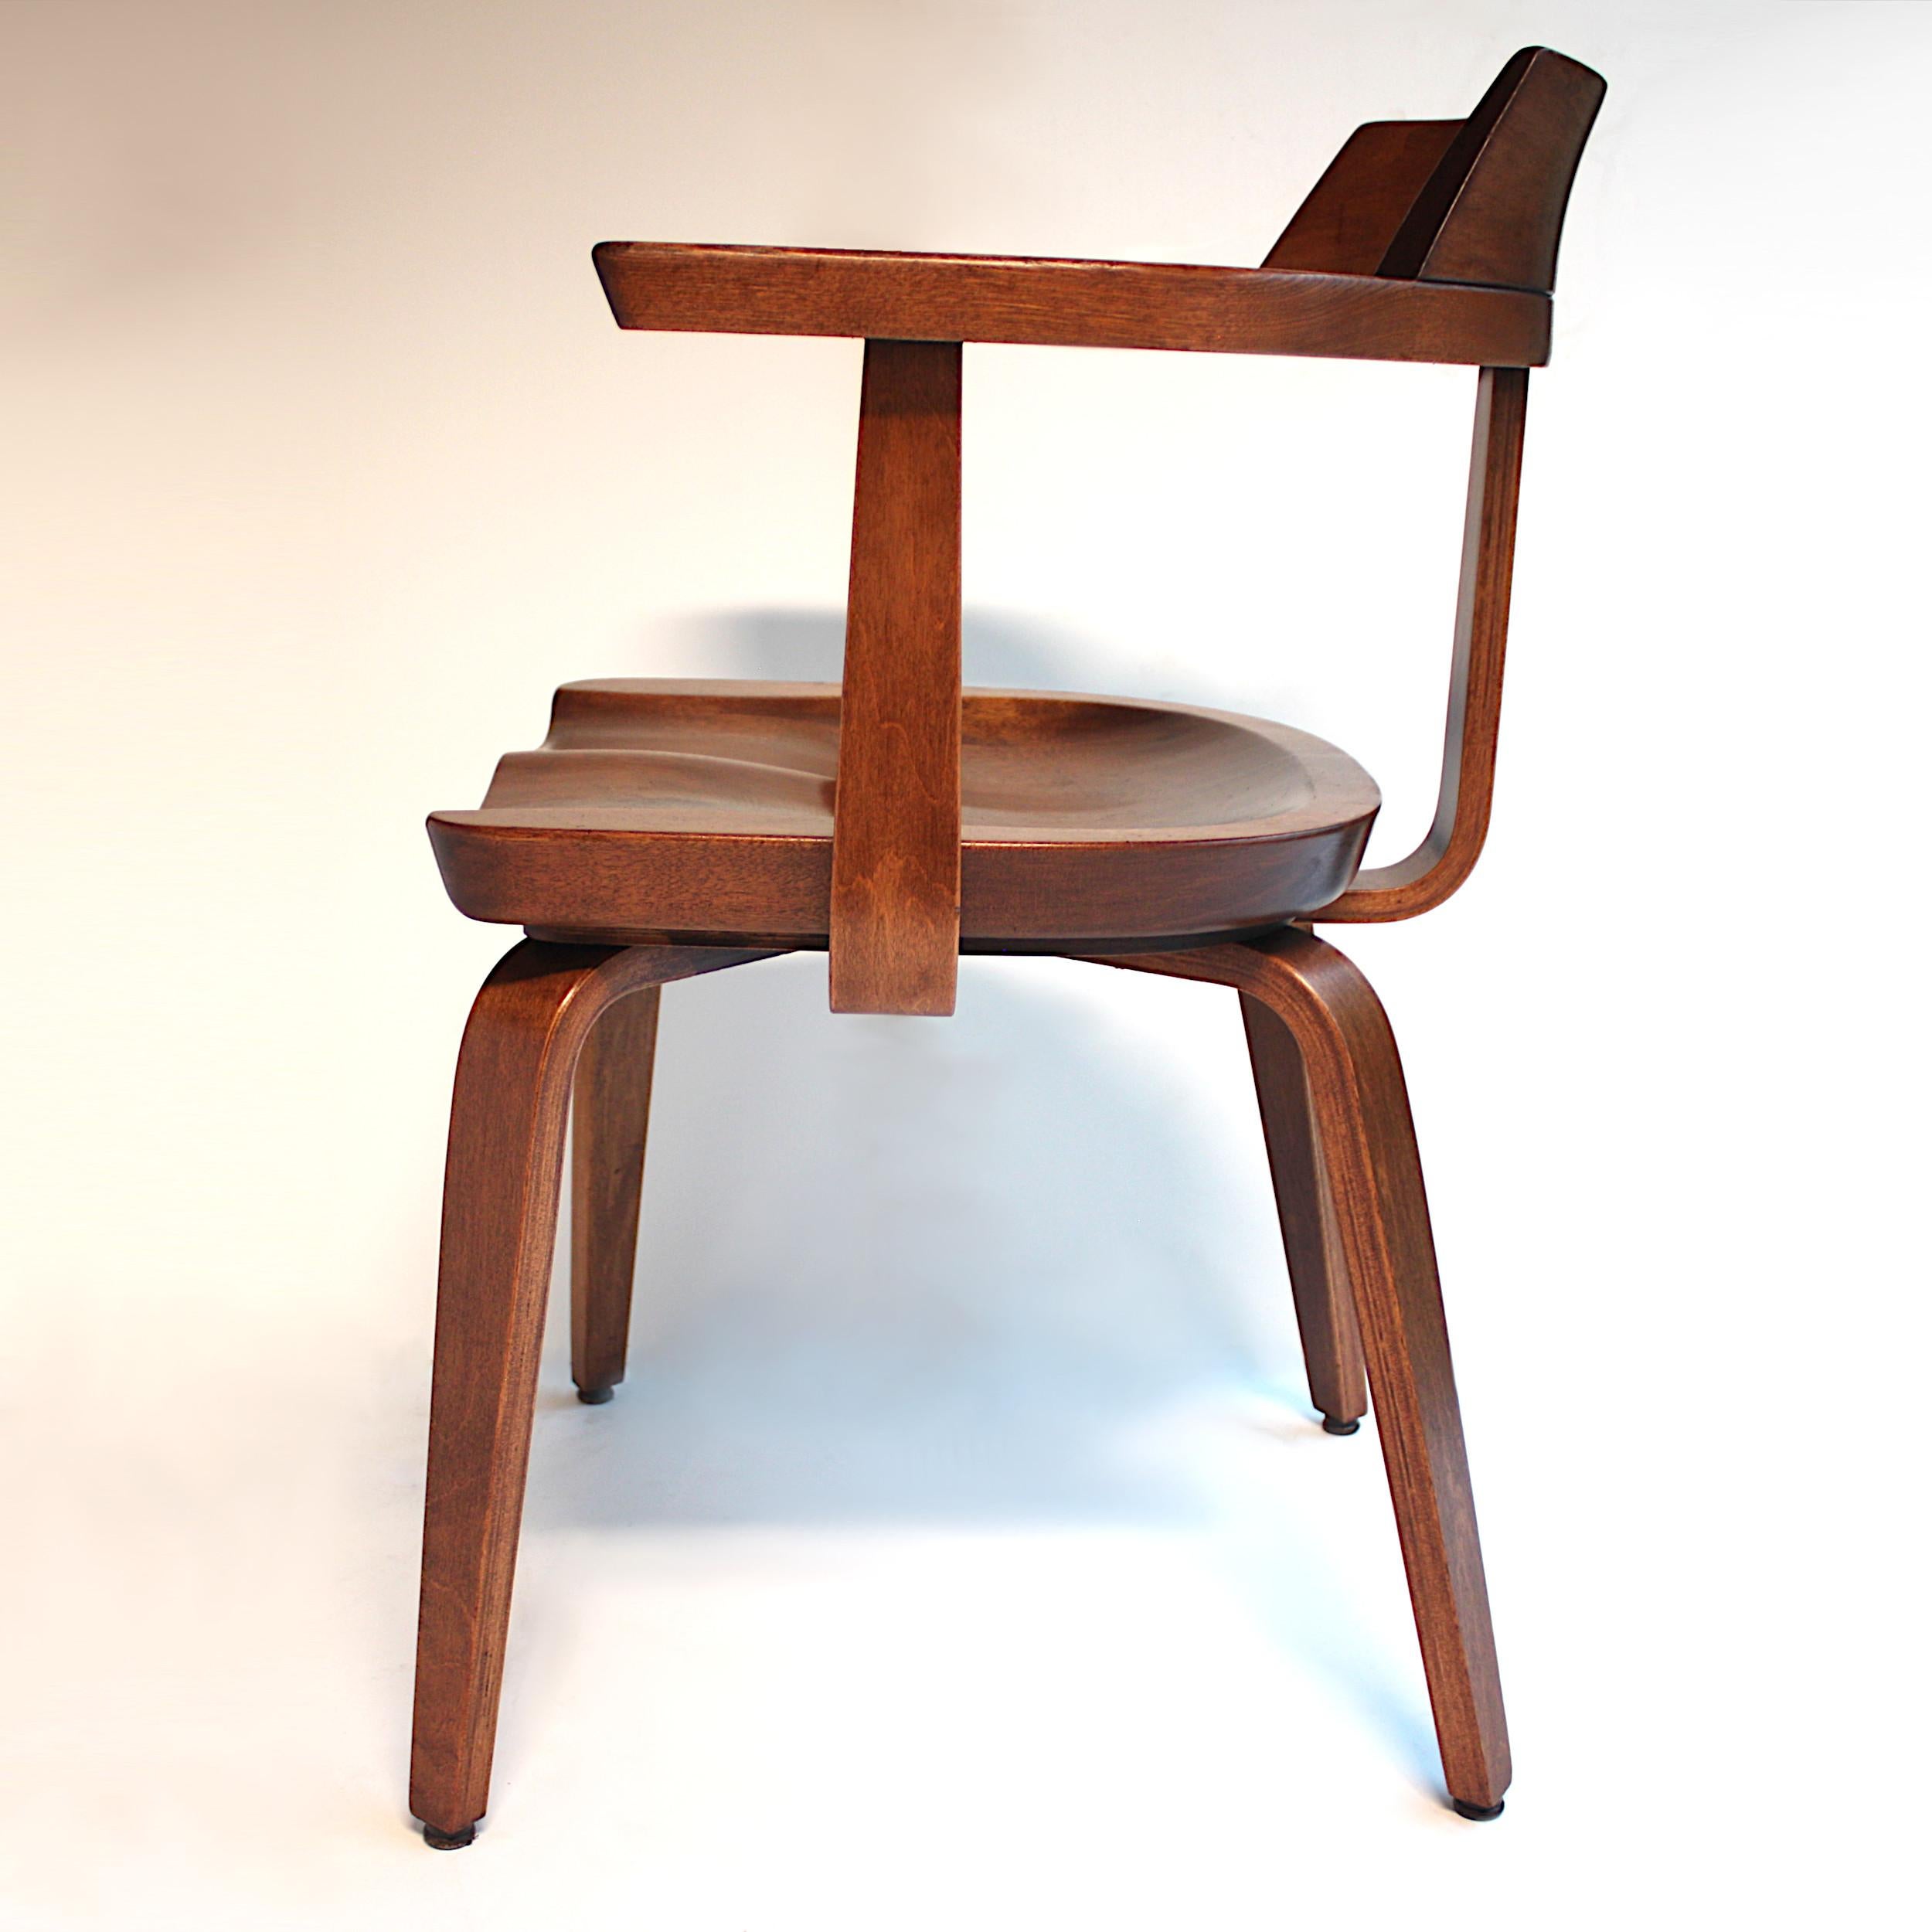 Carved Mid-Century Modern W199 Bent-Wood Chairs by Walter Gropius for Thonet Bauhaus